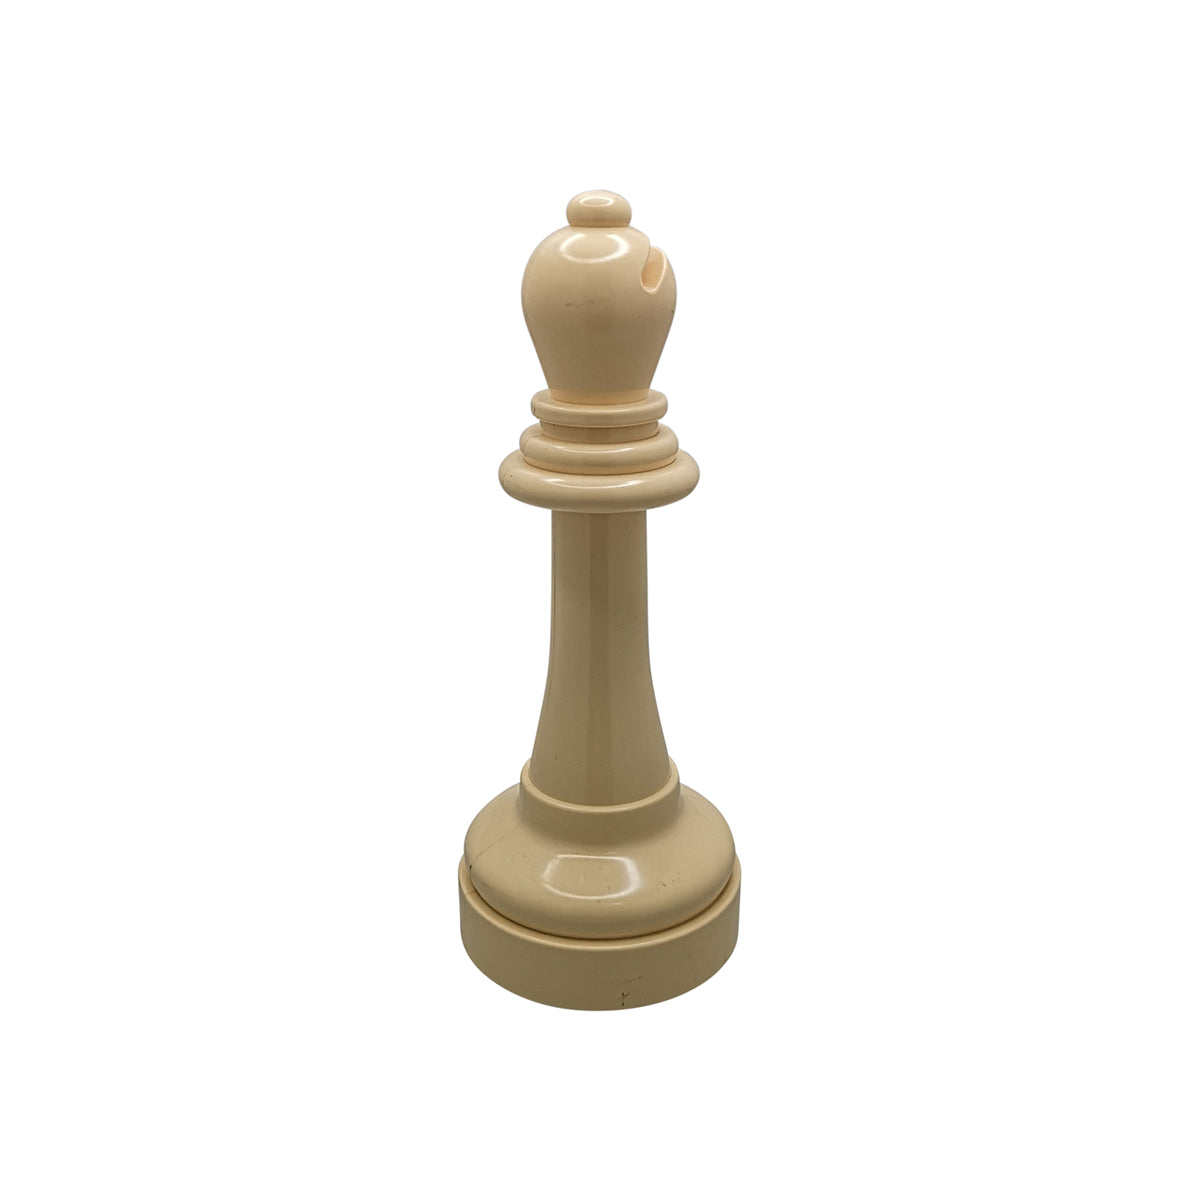 Giant Garden Chess 43cm Replacement Pieces